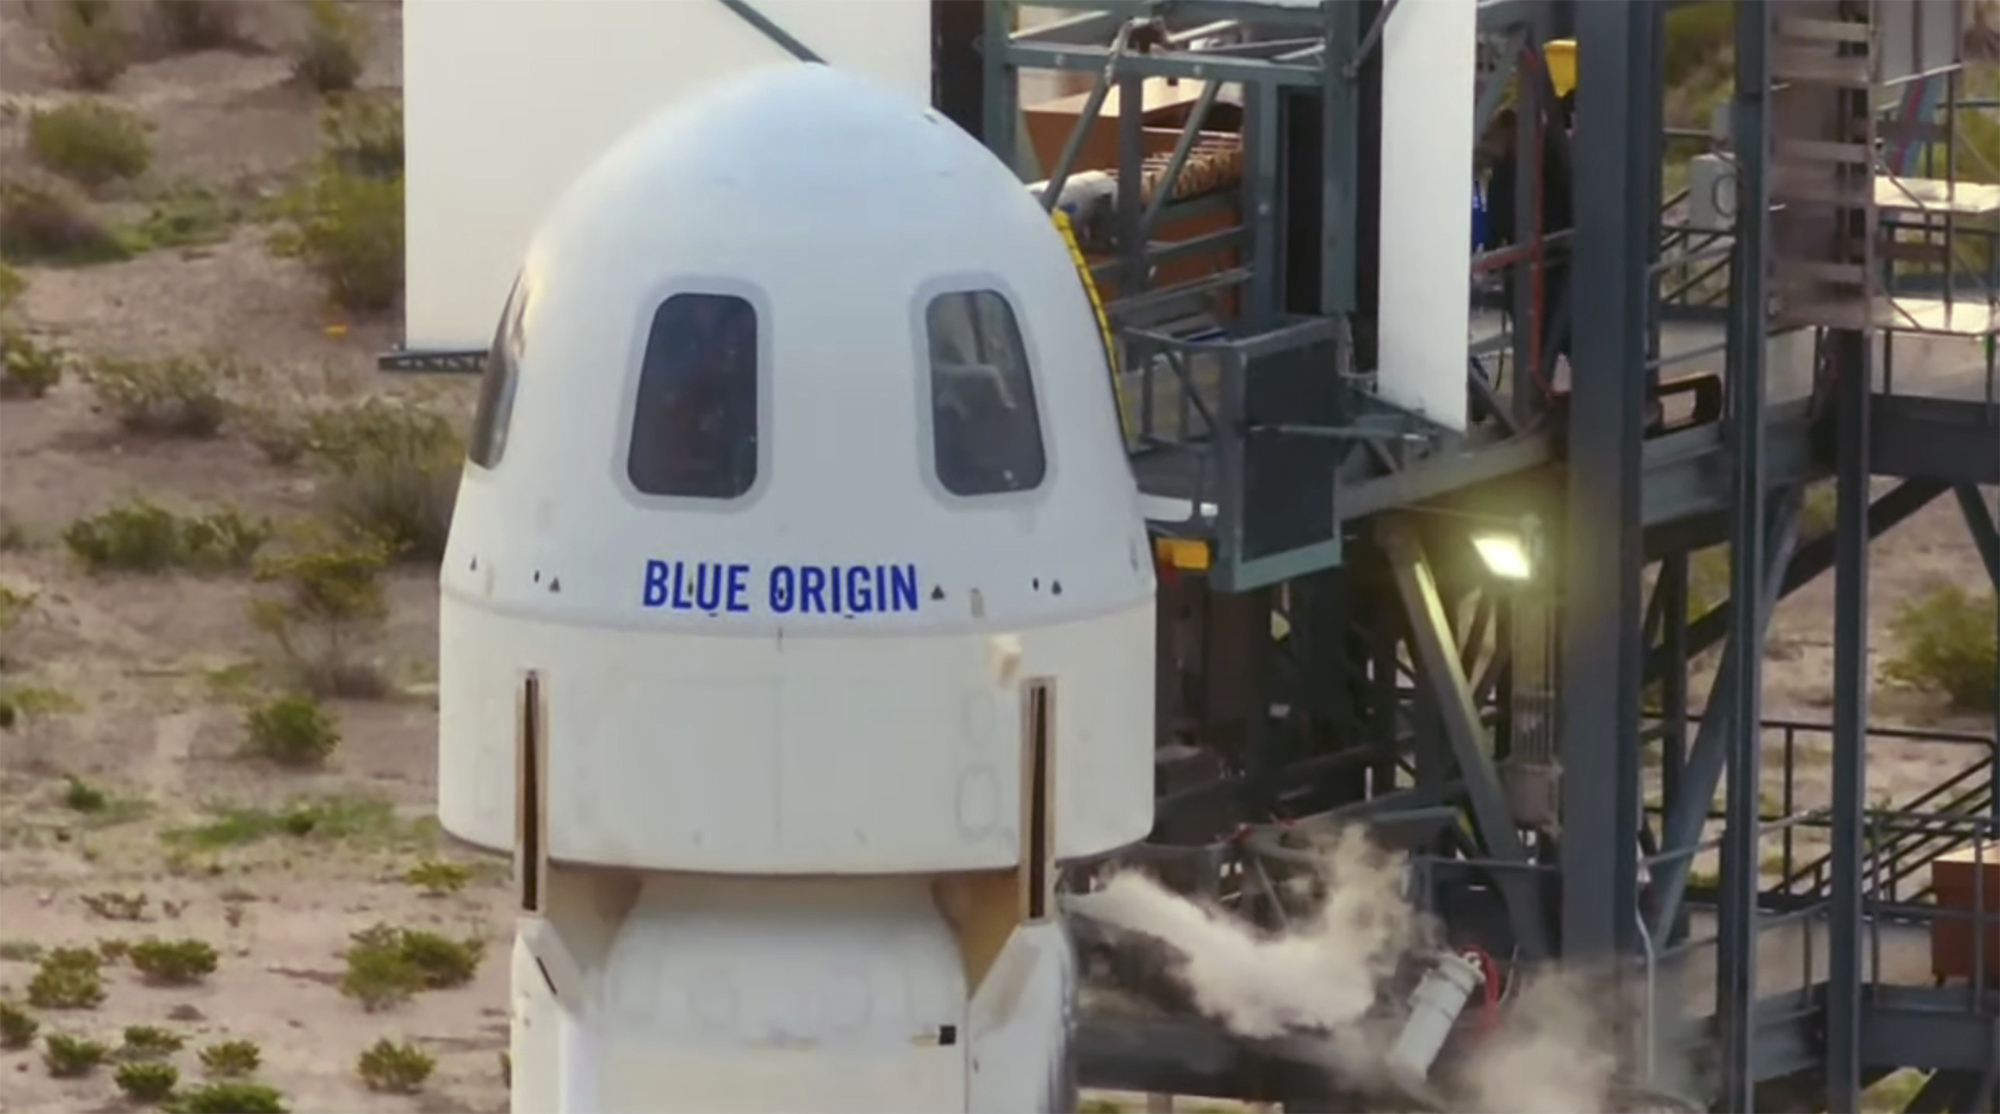 The passengers of the Blue Origin enter the capsule near Van Horn, Texas, Tuesday, July 20, 2021. The rocket is scheduled to launch later this morning will carry passengers Jeff Bezos, founder of Amazon and space tourism company Blue Origin, brother Mark Bezos, Oliver Daemen and Wally Funk. (Blue Origin via AP)